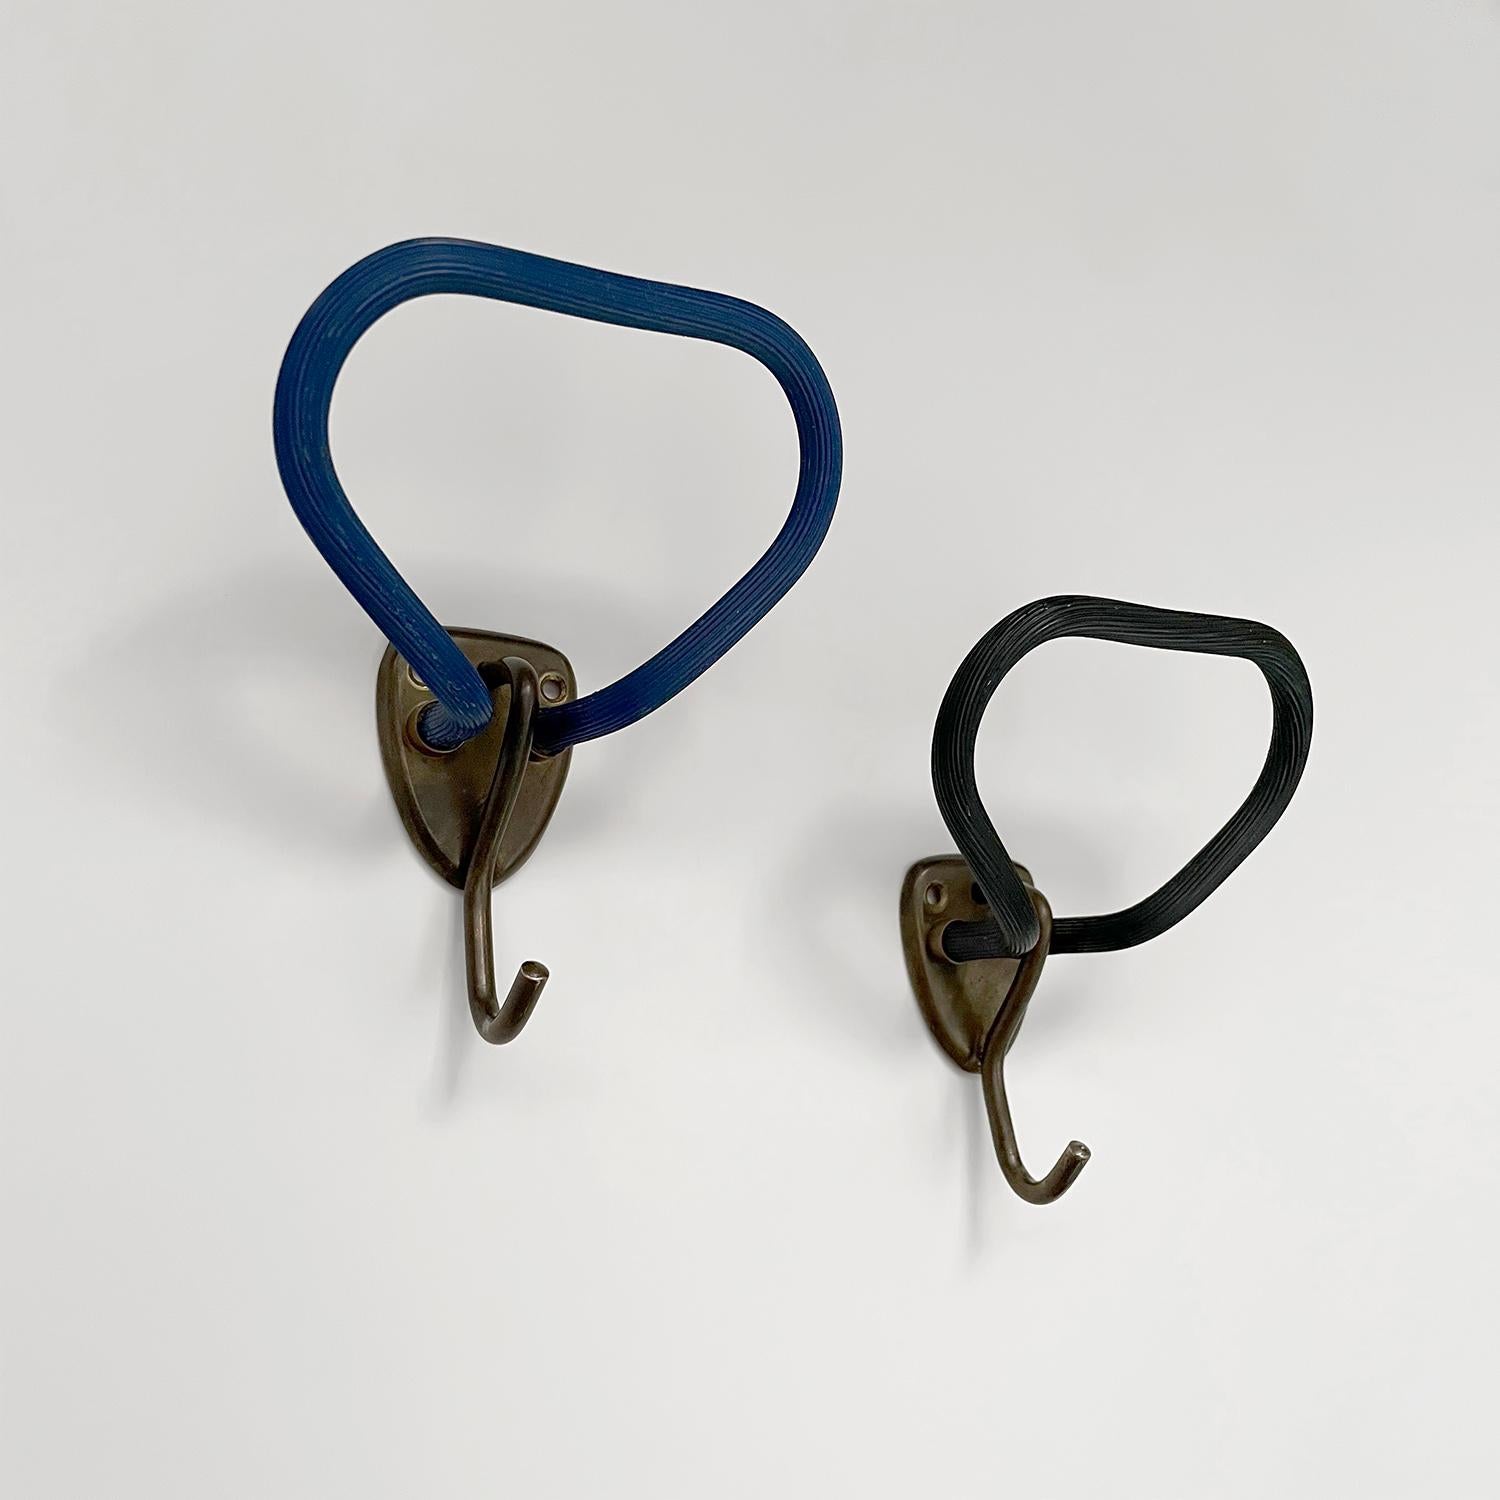 Pair of French industrial wall hooks
Rounded triangular upper arm is covered in a ridged tactile material 
Contrasted with an aged bronze petite j hook
Each wall mounted hook is supported by a single shield shaped bracket which requires two screws